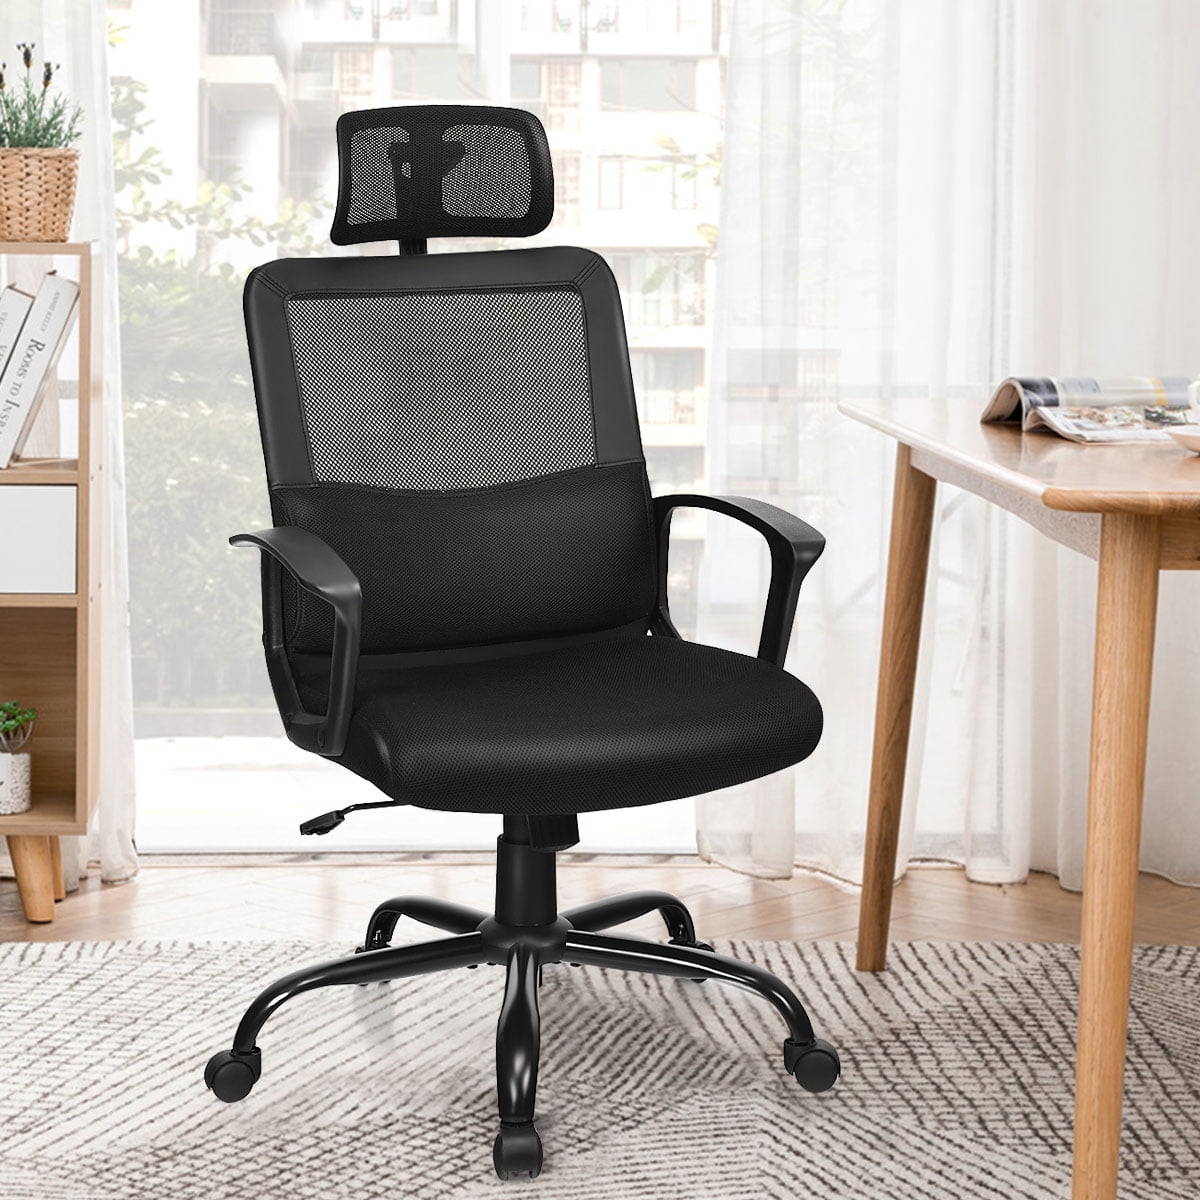 Ergonomic Fully Adjustable Office Swivel Chairs  by Summit with lumber support 